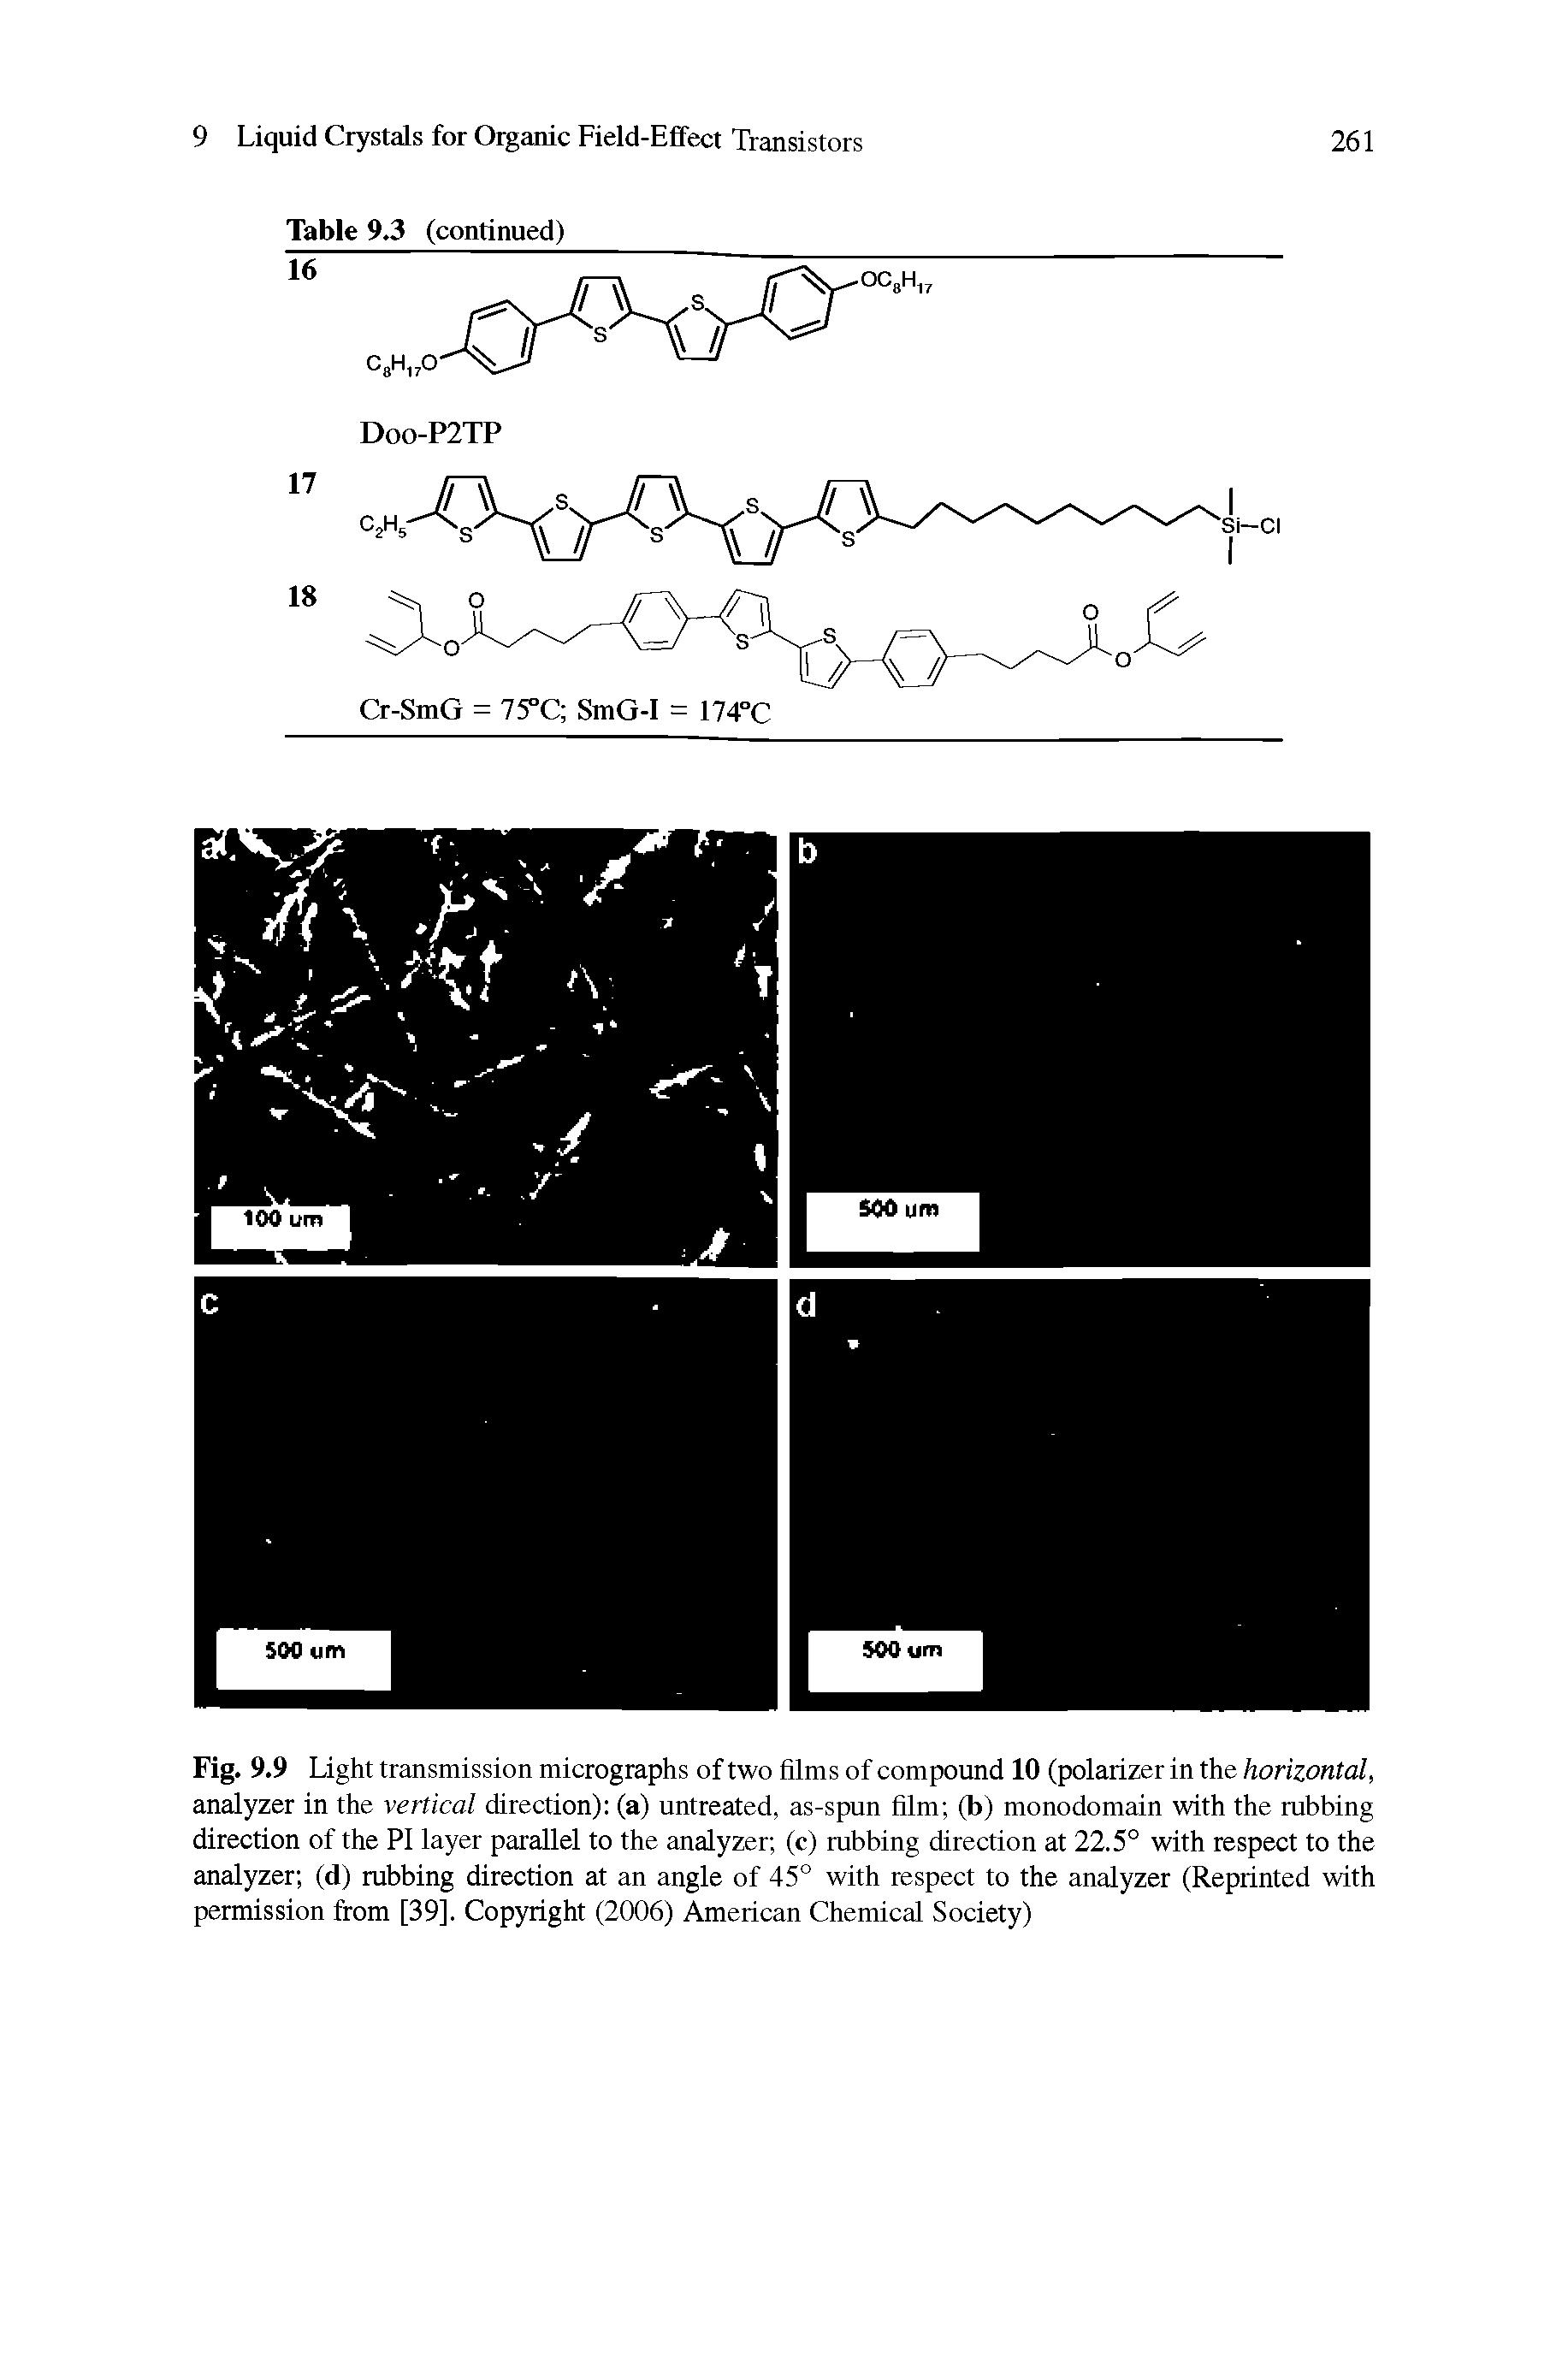 Fig. 9.9 Light transmission micrographs of two films of compound 10 (polarizer in the horizontal, analyzer in the vertical direction) (a) untreated, as-spun film (b) monodomain with the rubbing direction of the PI layer parallel to the analyzer (c) rubbing direction at 22.5° with respect to the analyzer (d) rubbing direction at an angle of 45° with respect to the analyzer (Reprinted with permission from [39]. Copyright (2006) American Chemical Society)...